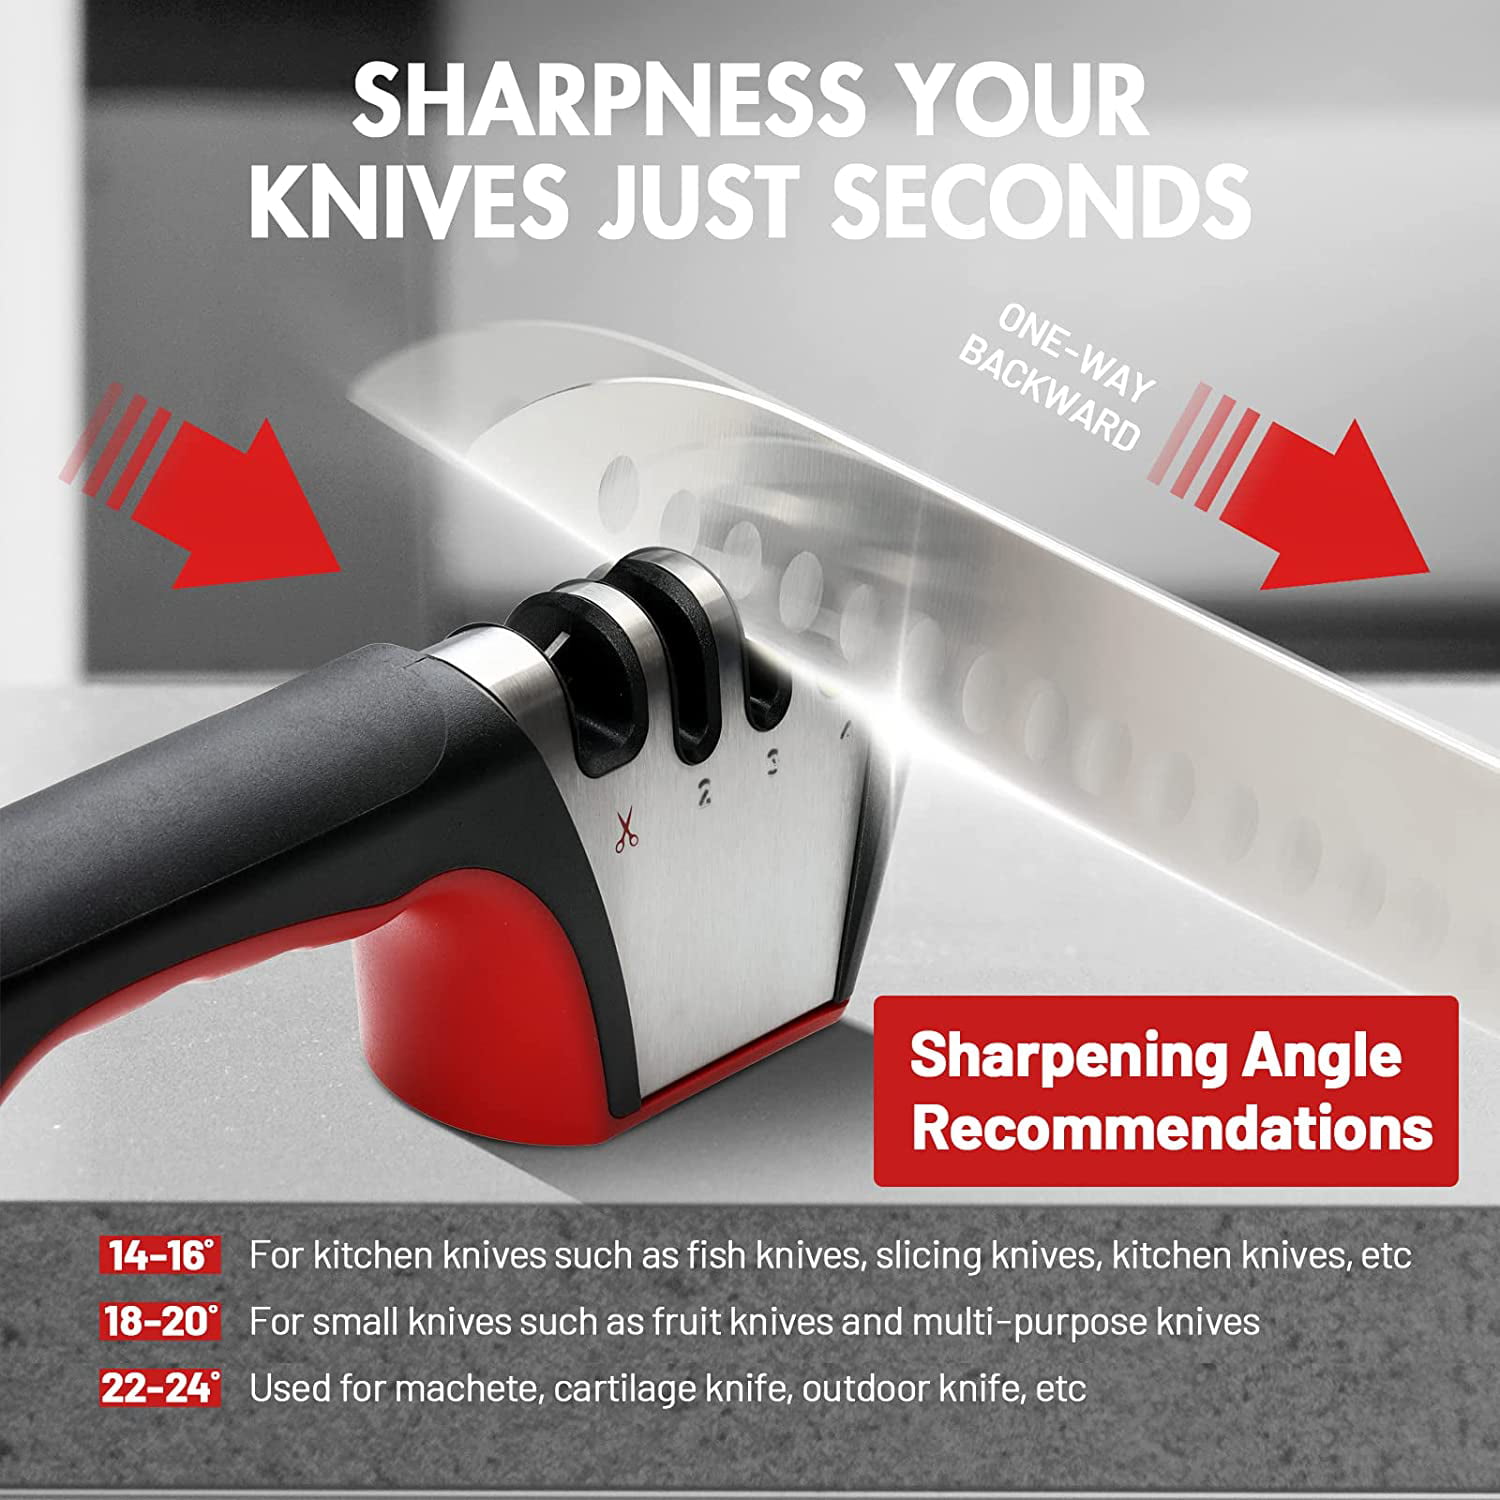 4 in 1 longzon [Grade 4] Knife Sharpener with Pair of Cut Resistant Gloves,  Original High Quality Polished Blades, Best Kitchen Knife Sharpener, Truly  Suitable for Ceramic and Steel Knives, Scissors. 